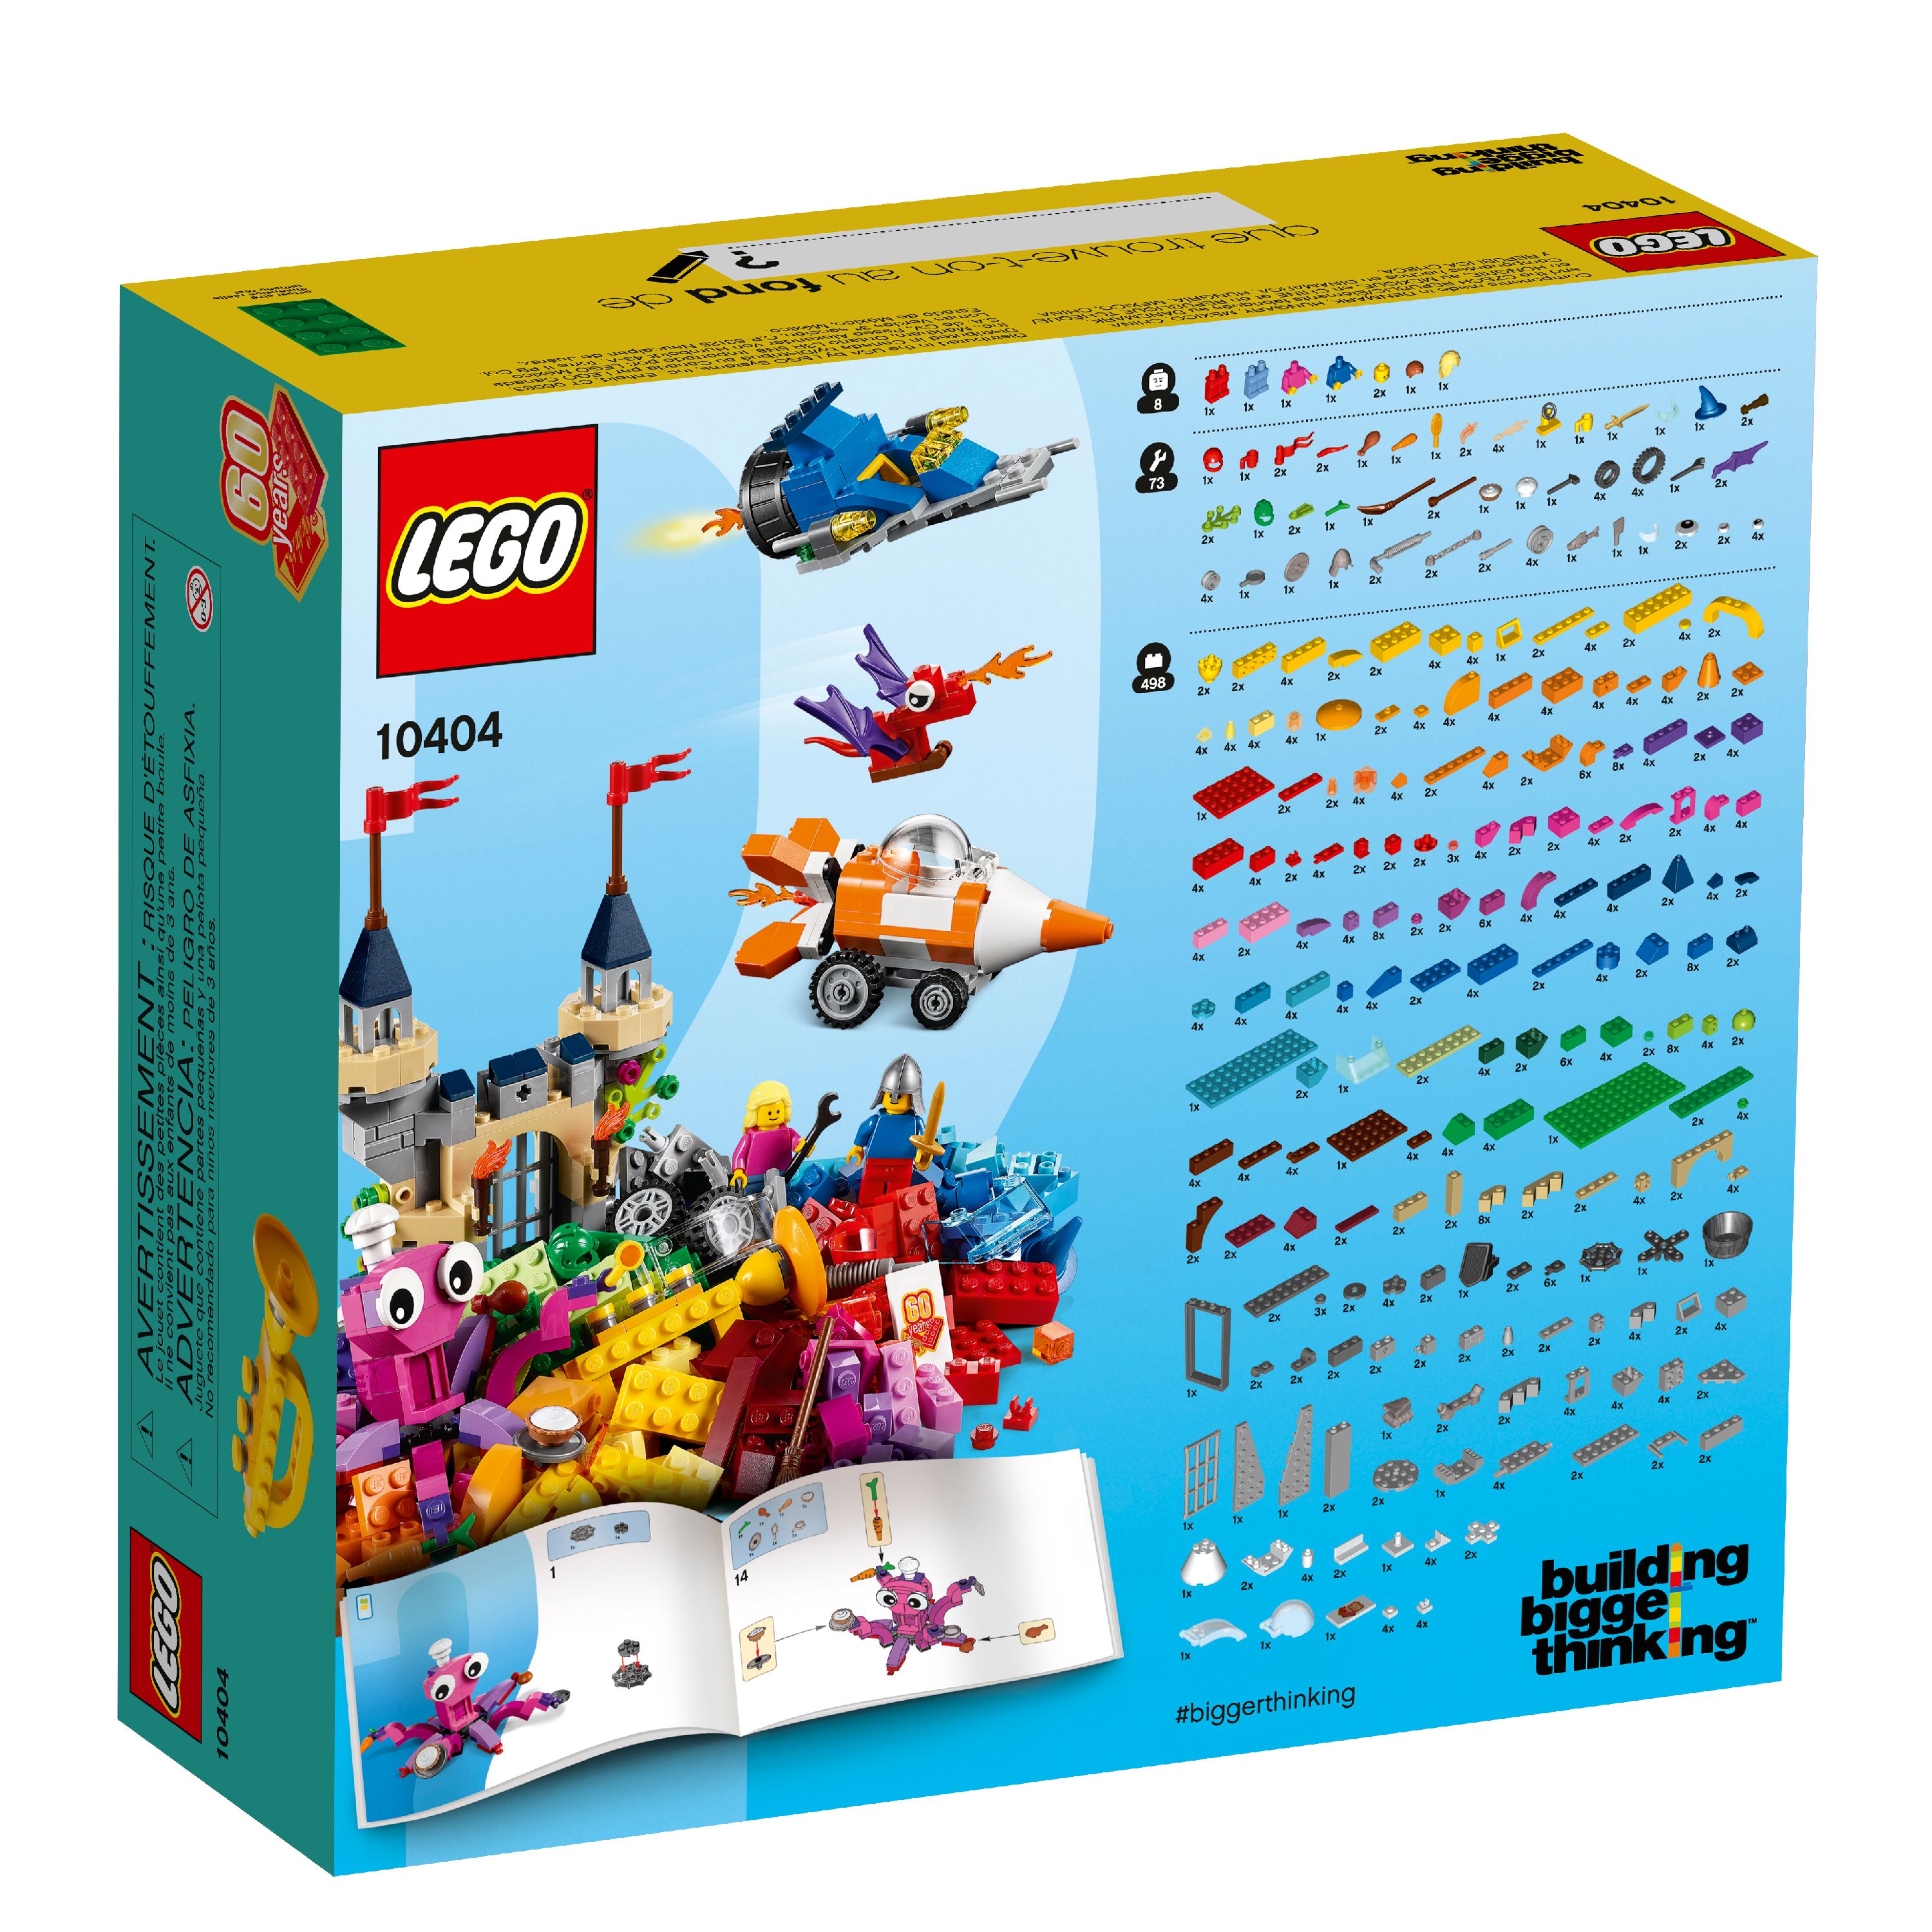 LEGO Brand Campaign Products Ocean's Bottom 10404 - image 5 of 7